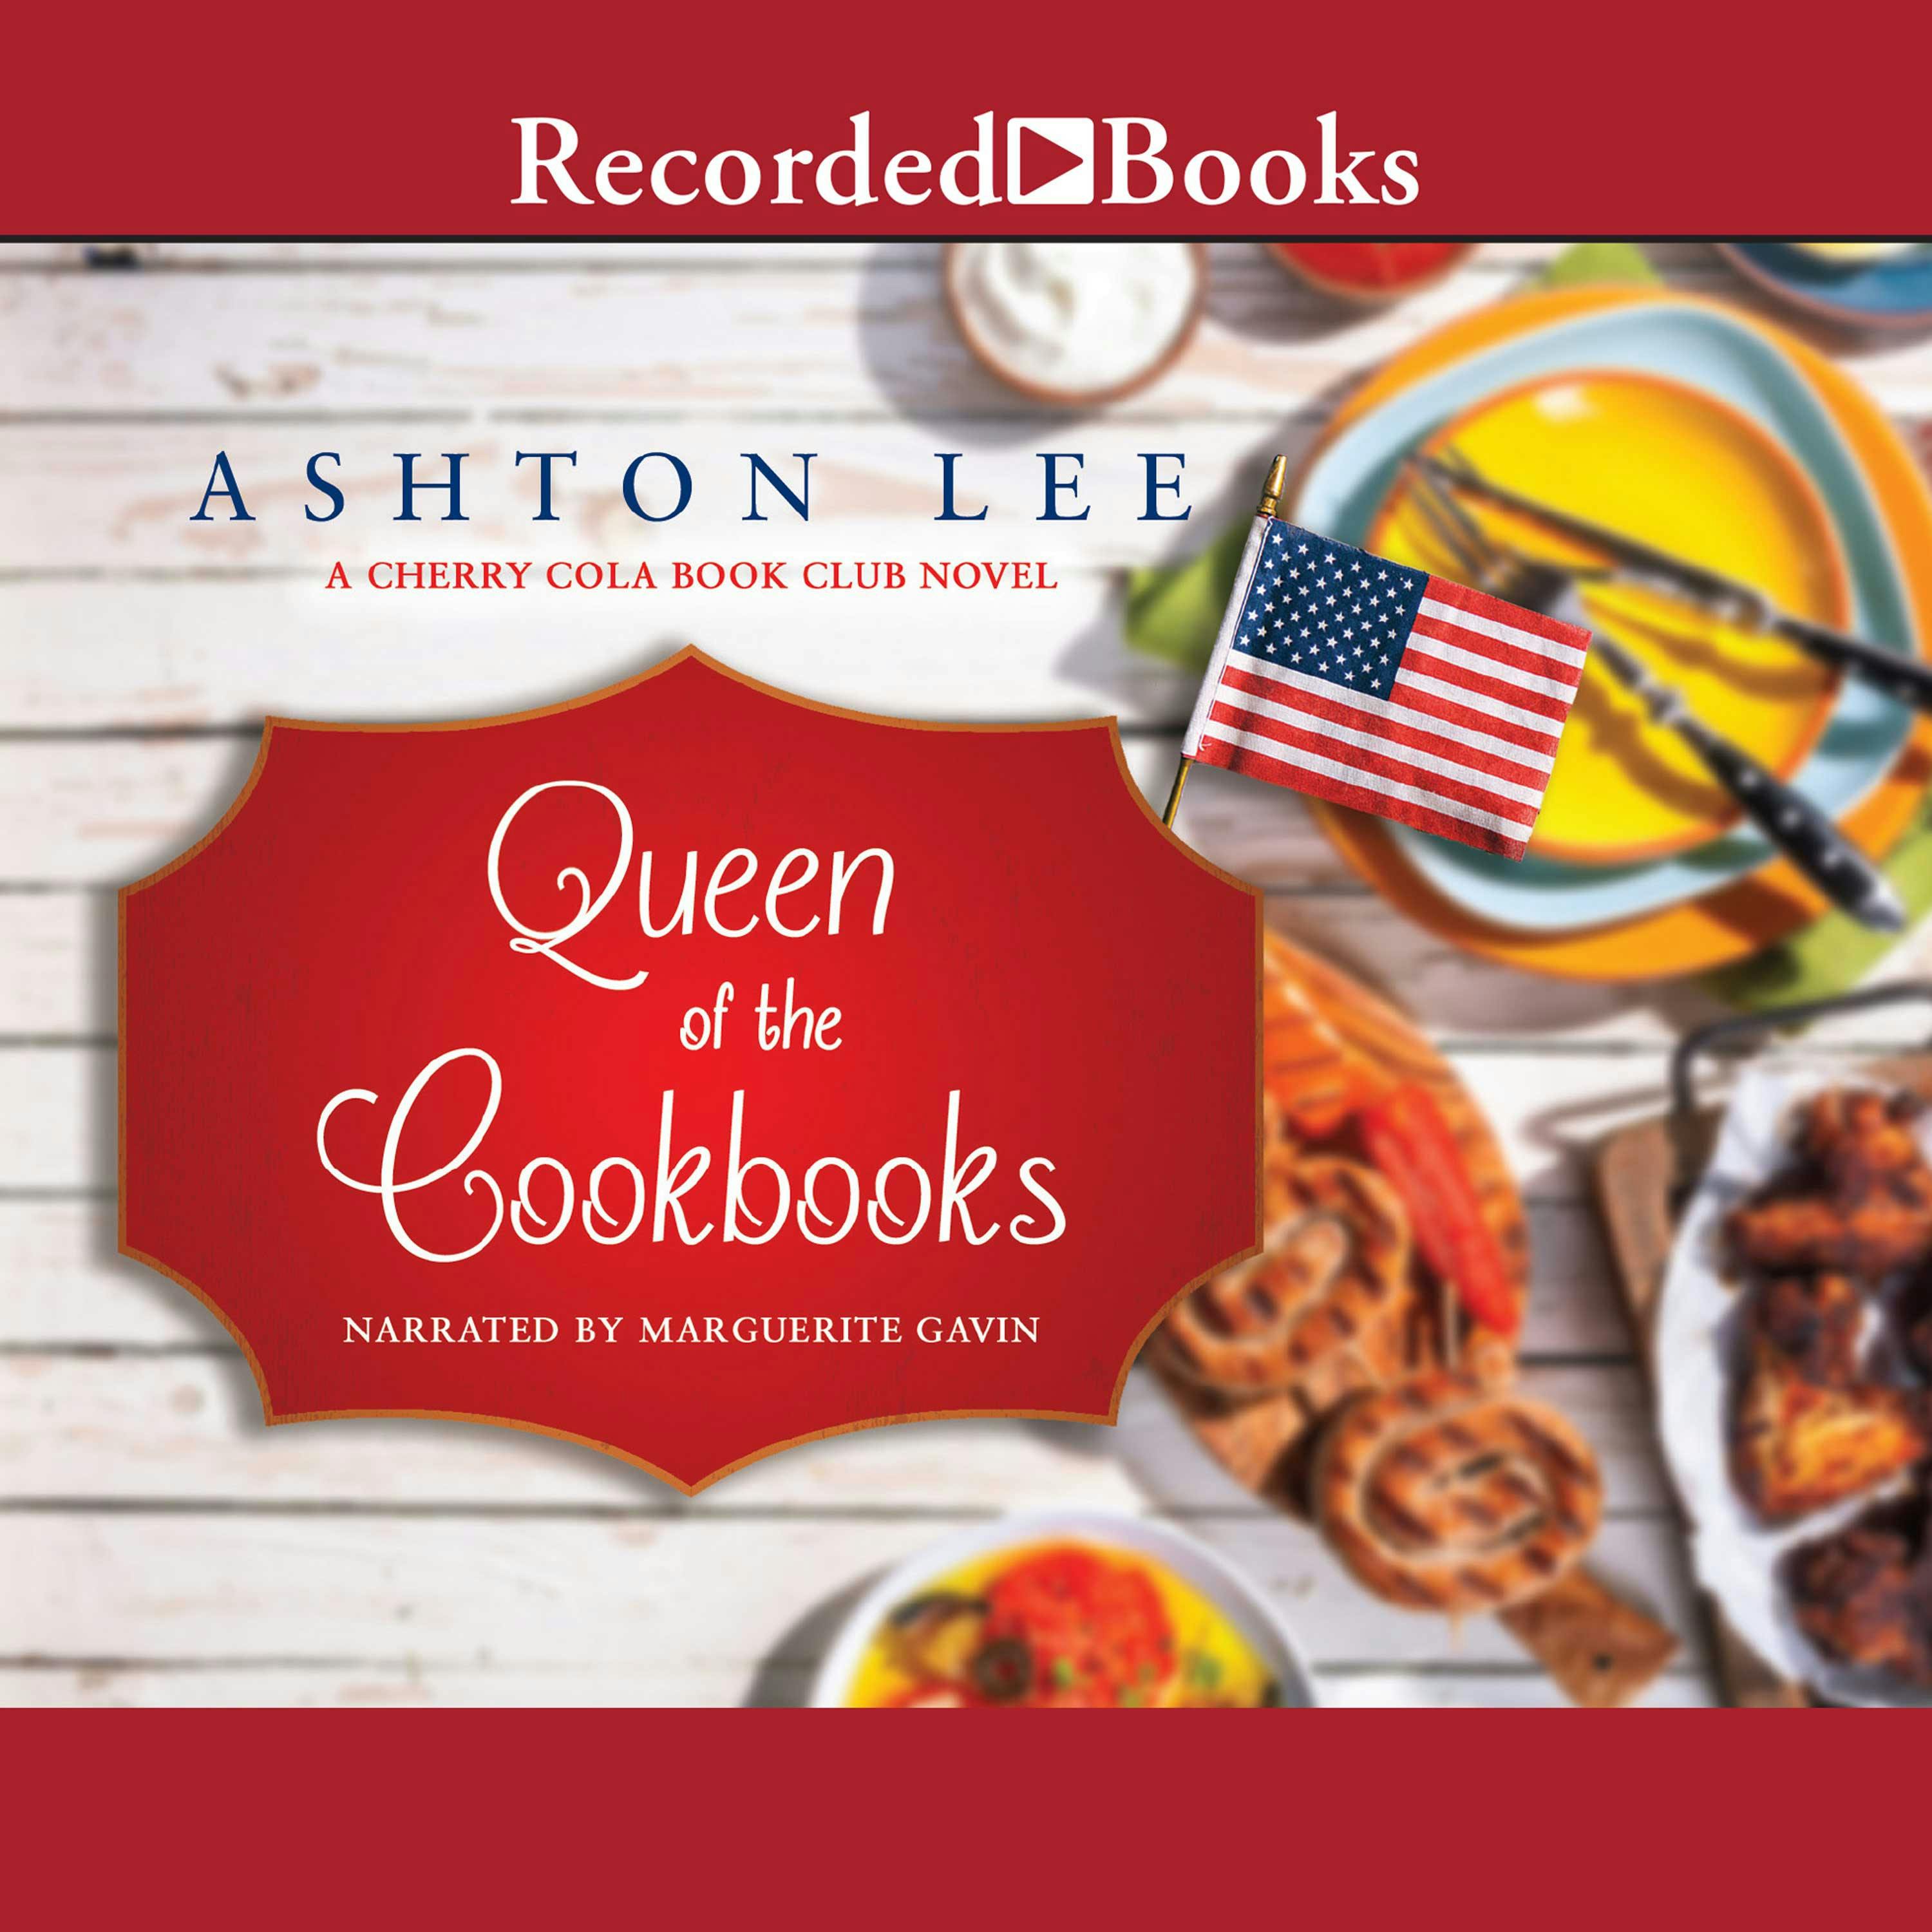 Queen of the Cookbooks - undefined